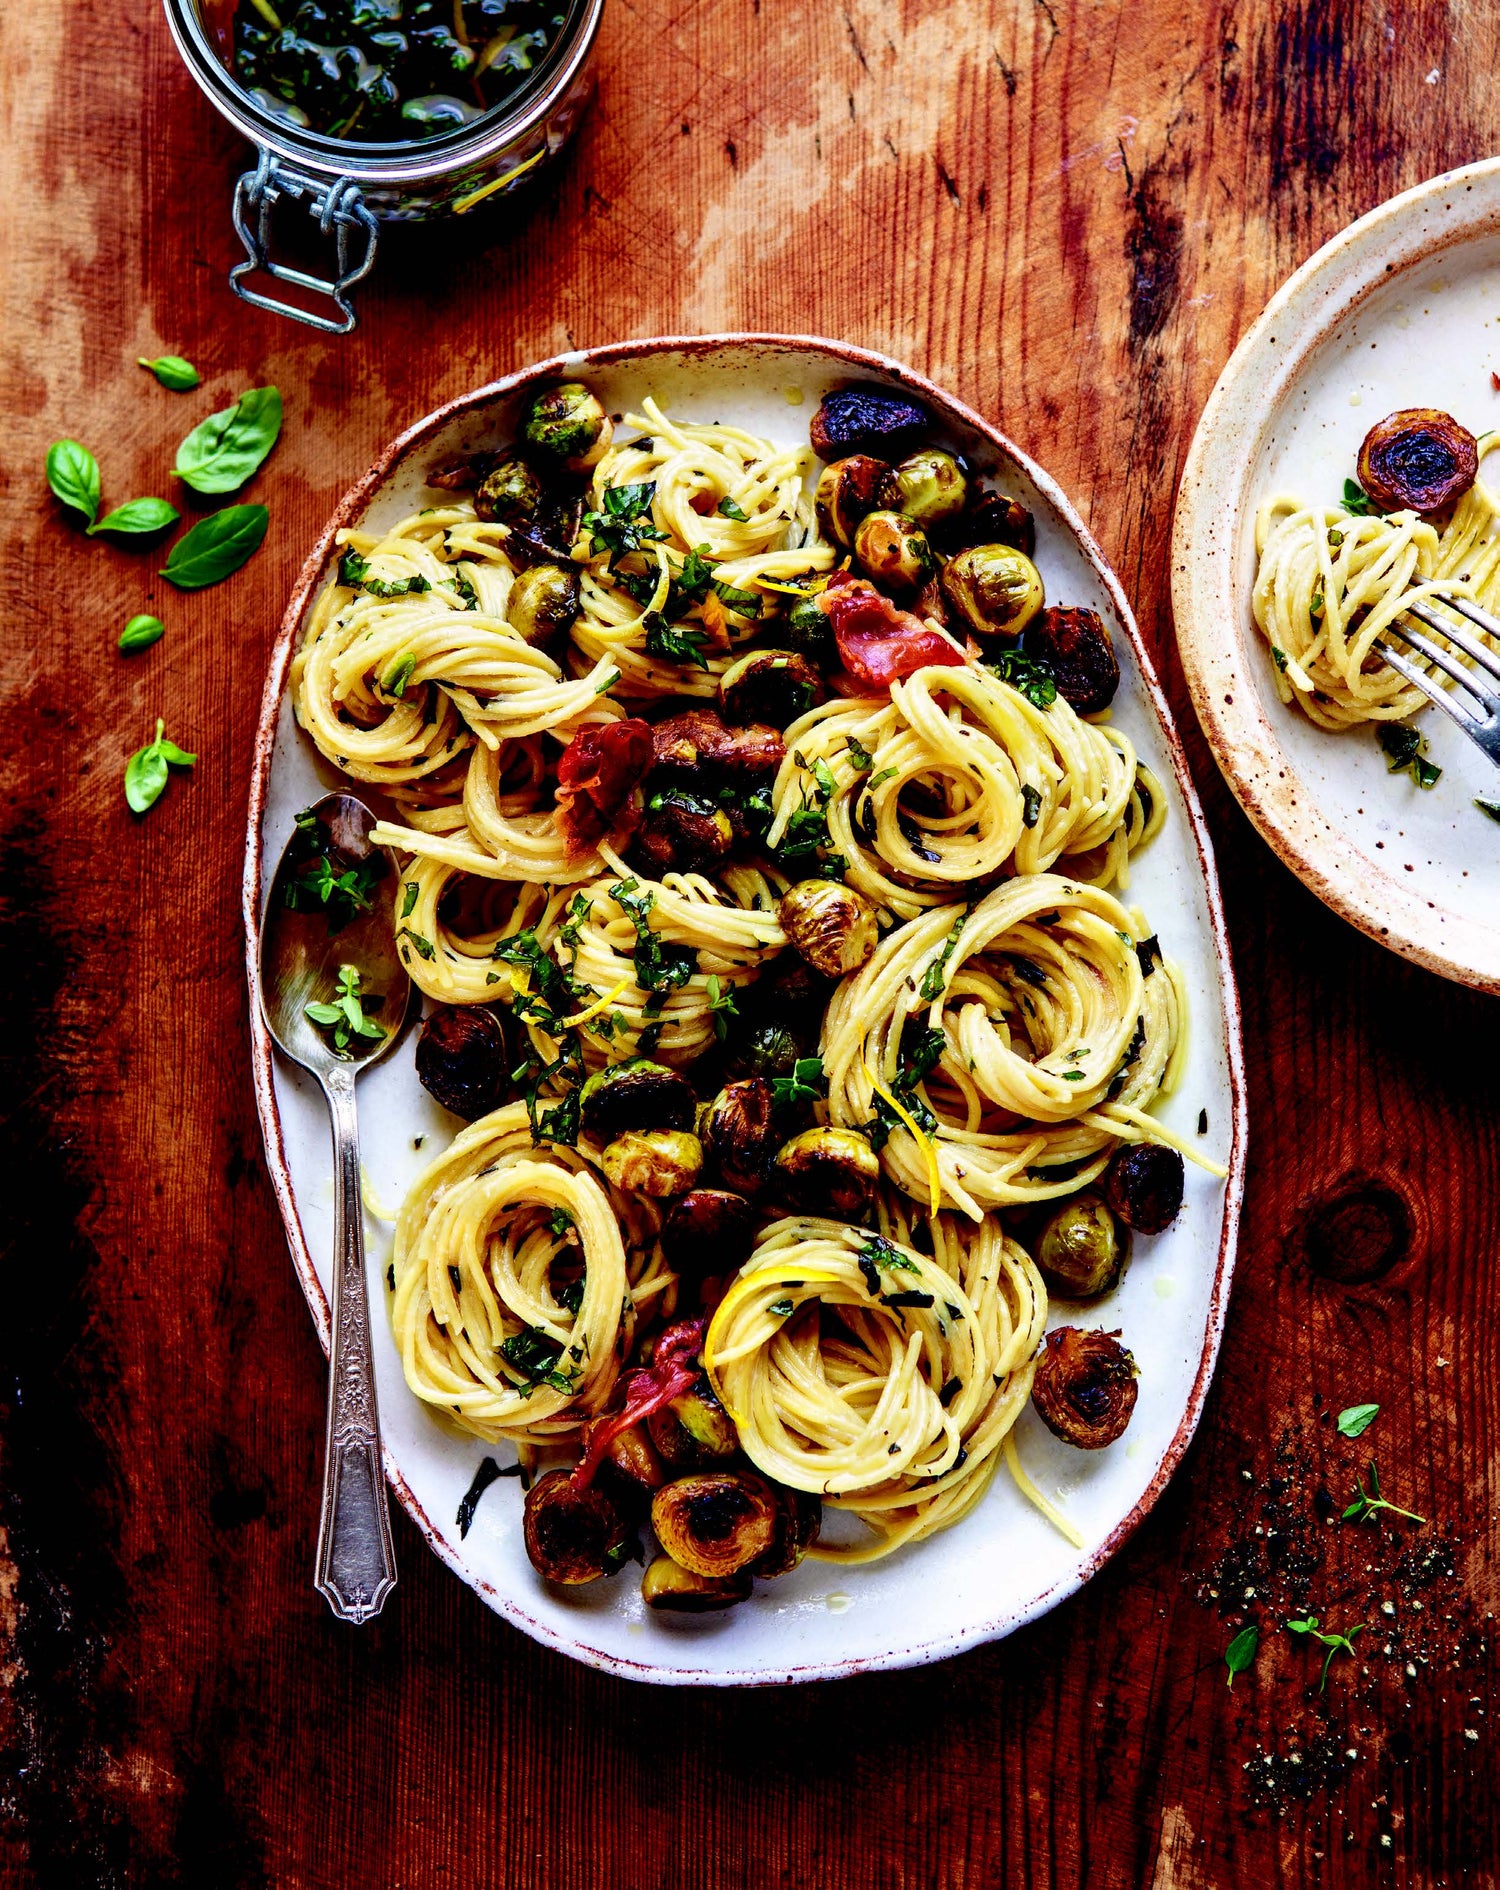 BrightRX: Lemon Basil Pasta with Balsamic Brussels Sprouts